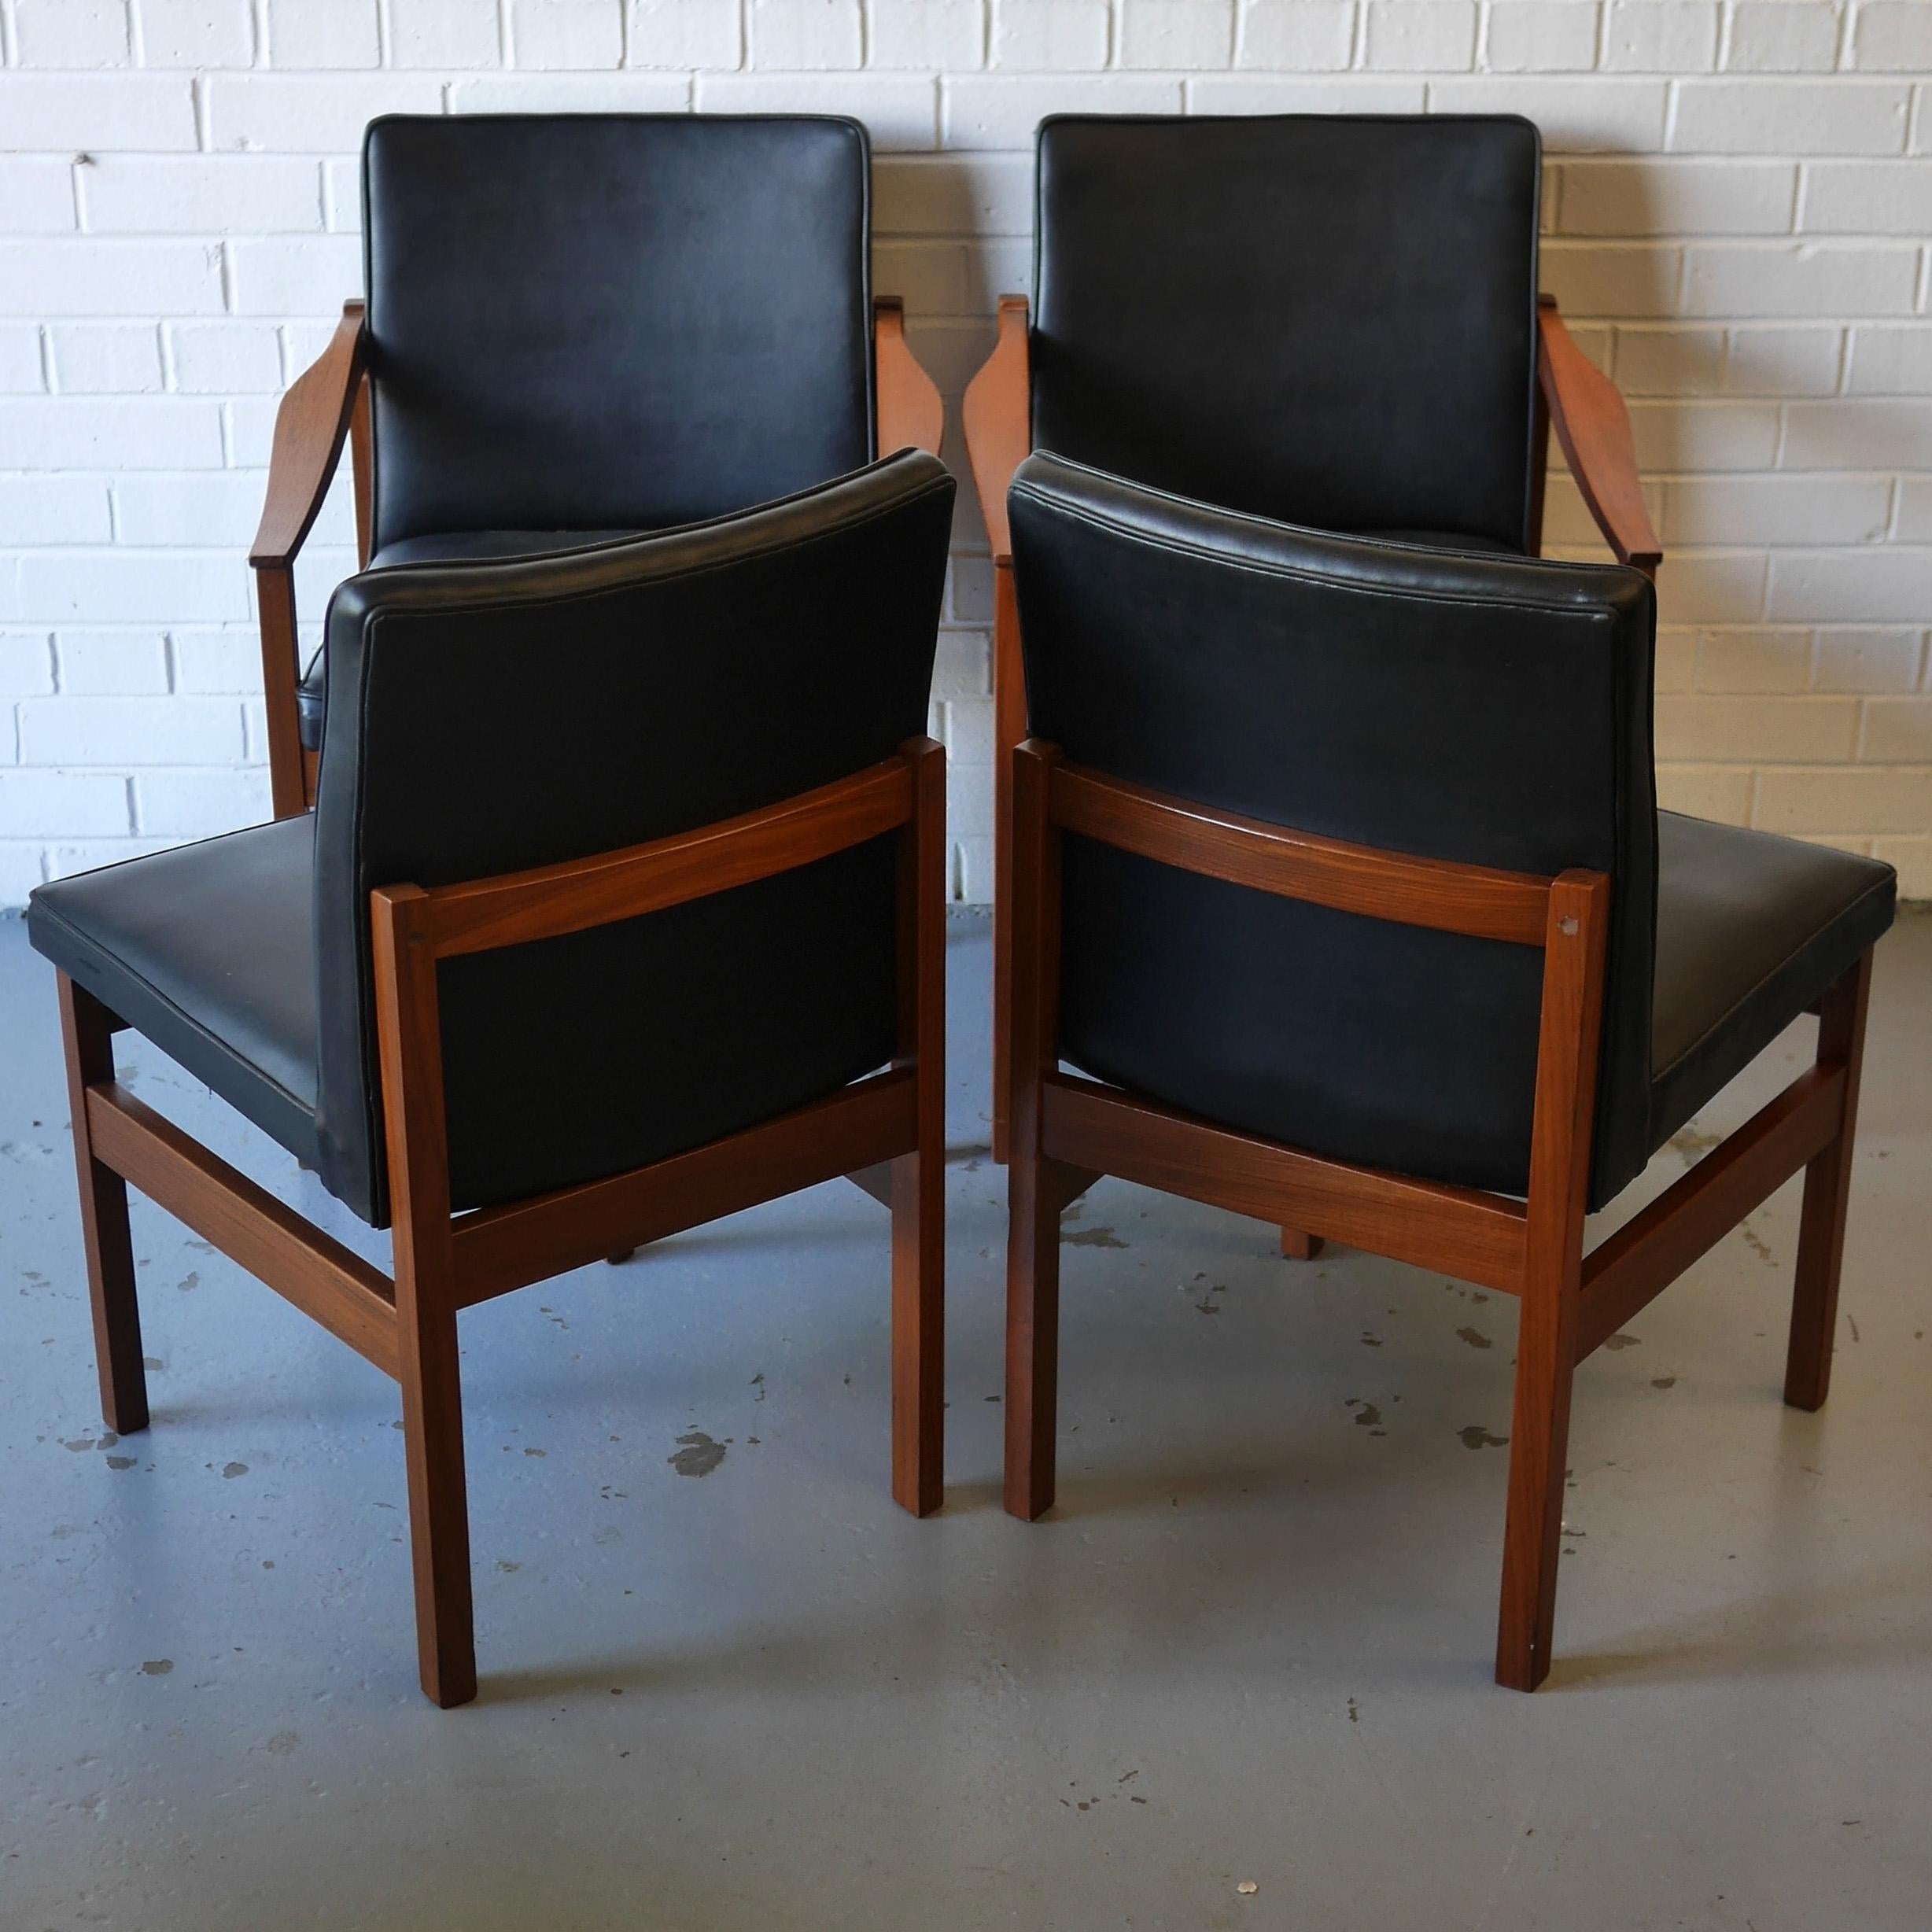 A set of 6 Knightsbridge solid afrormosia dining chairs with black vinyl seats - 2 carvers and 4 standard chairs with square cut angular frames and a generous seat base and back designed by Robert Heritage for Archie Shine. In good 'as found'